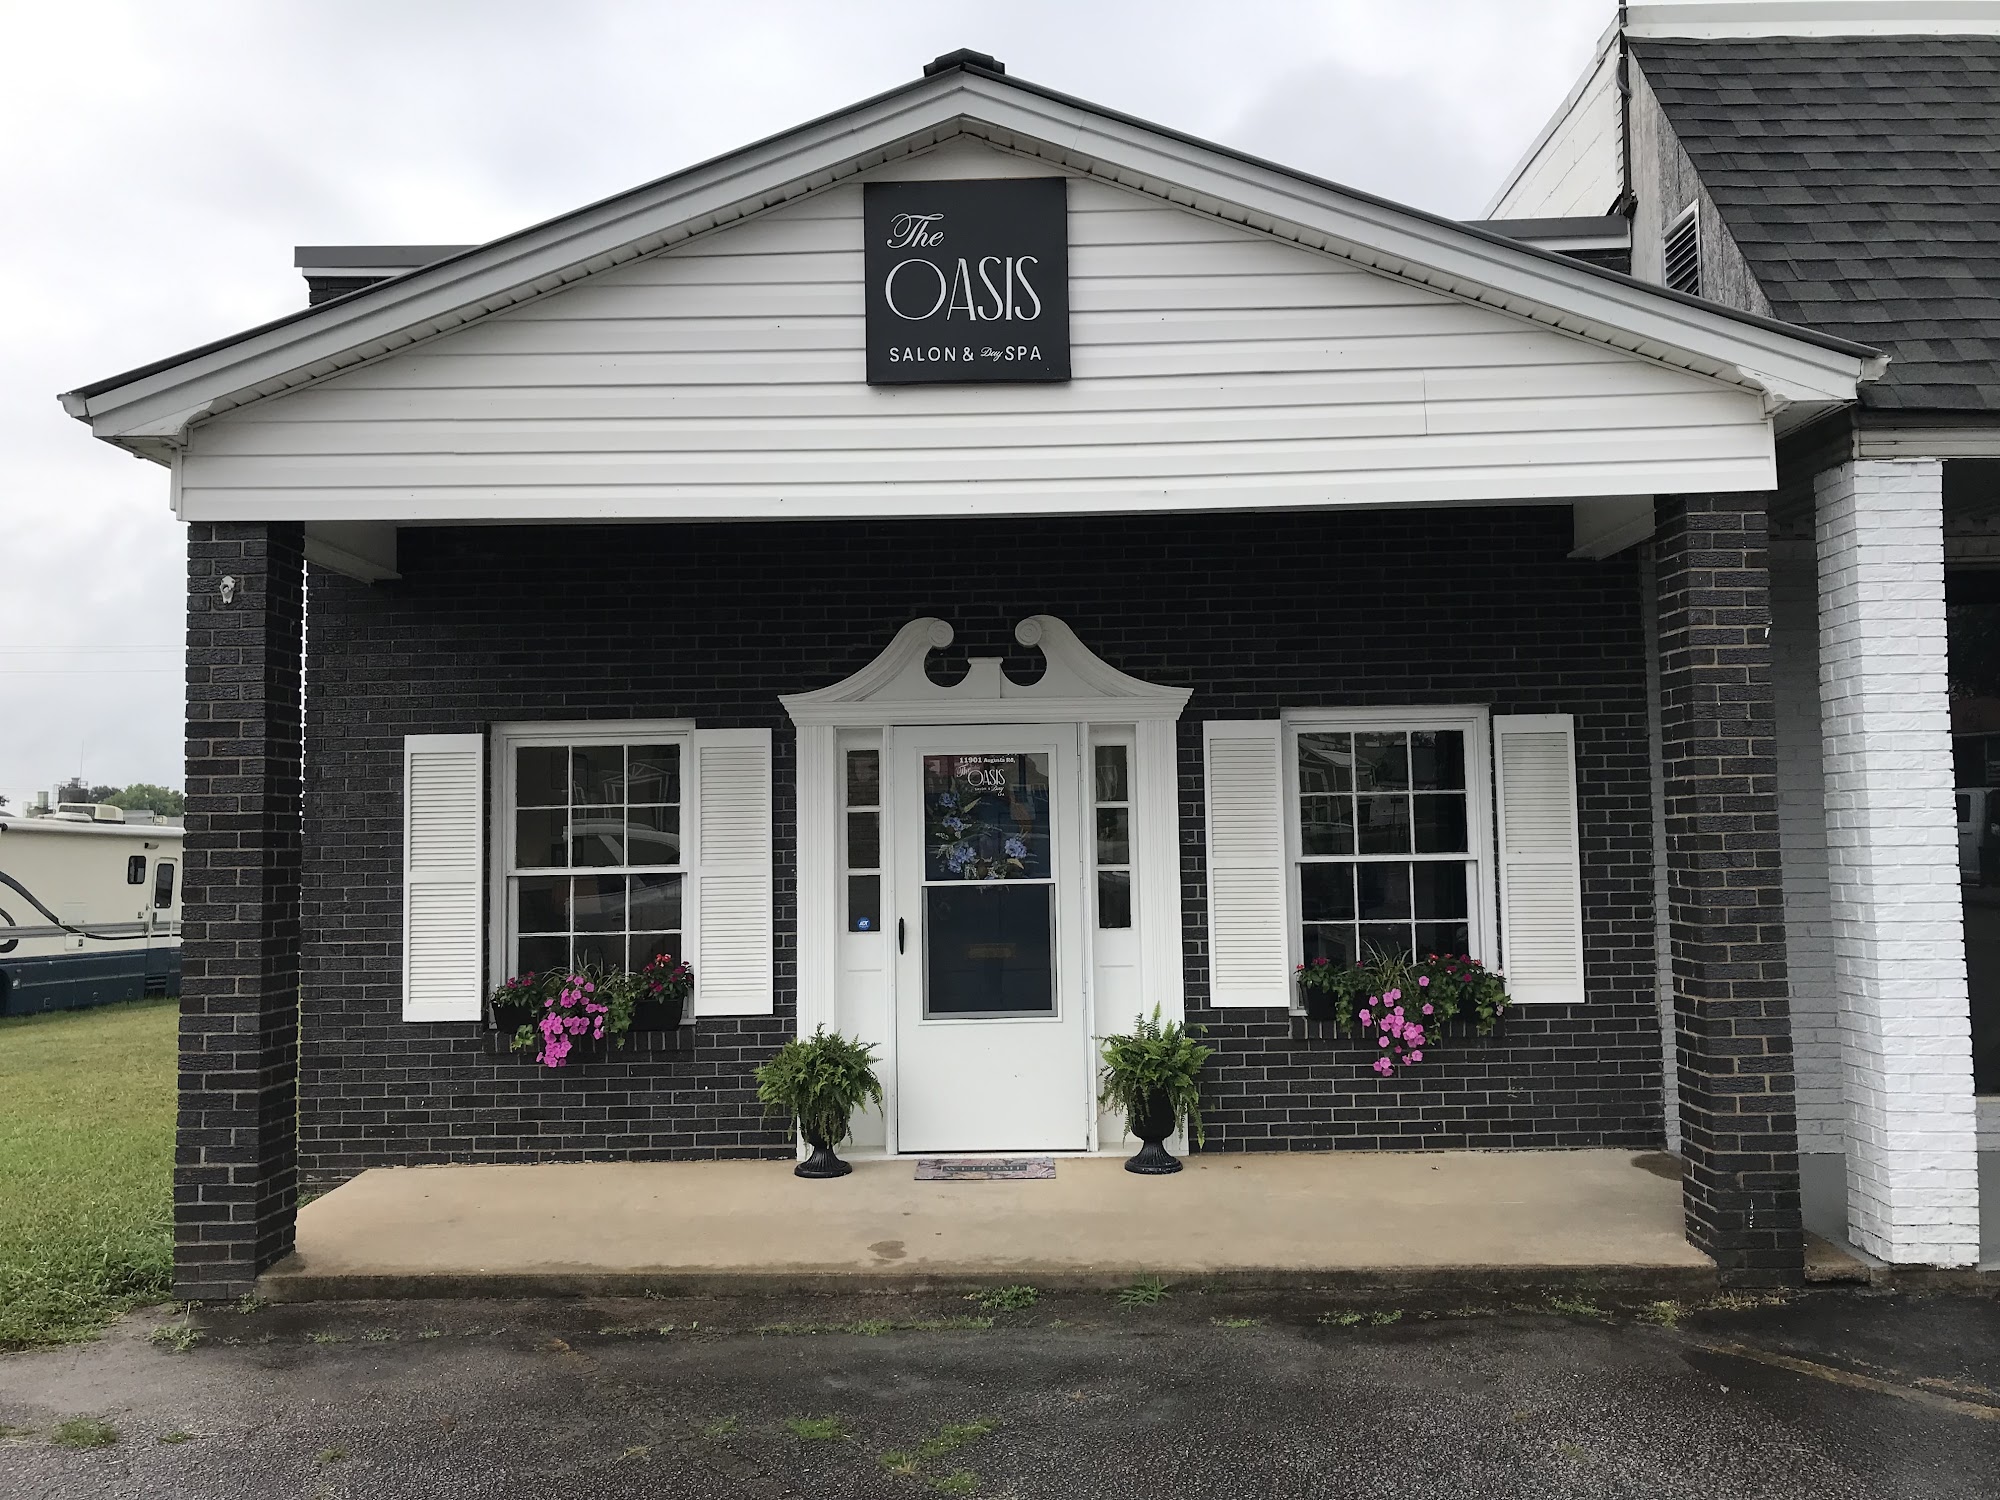 The Oasis Salon & Day Spa